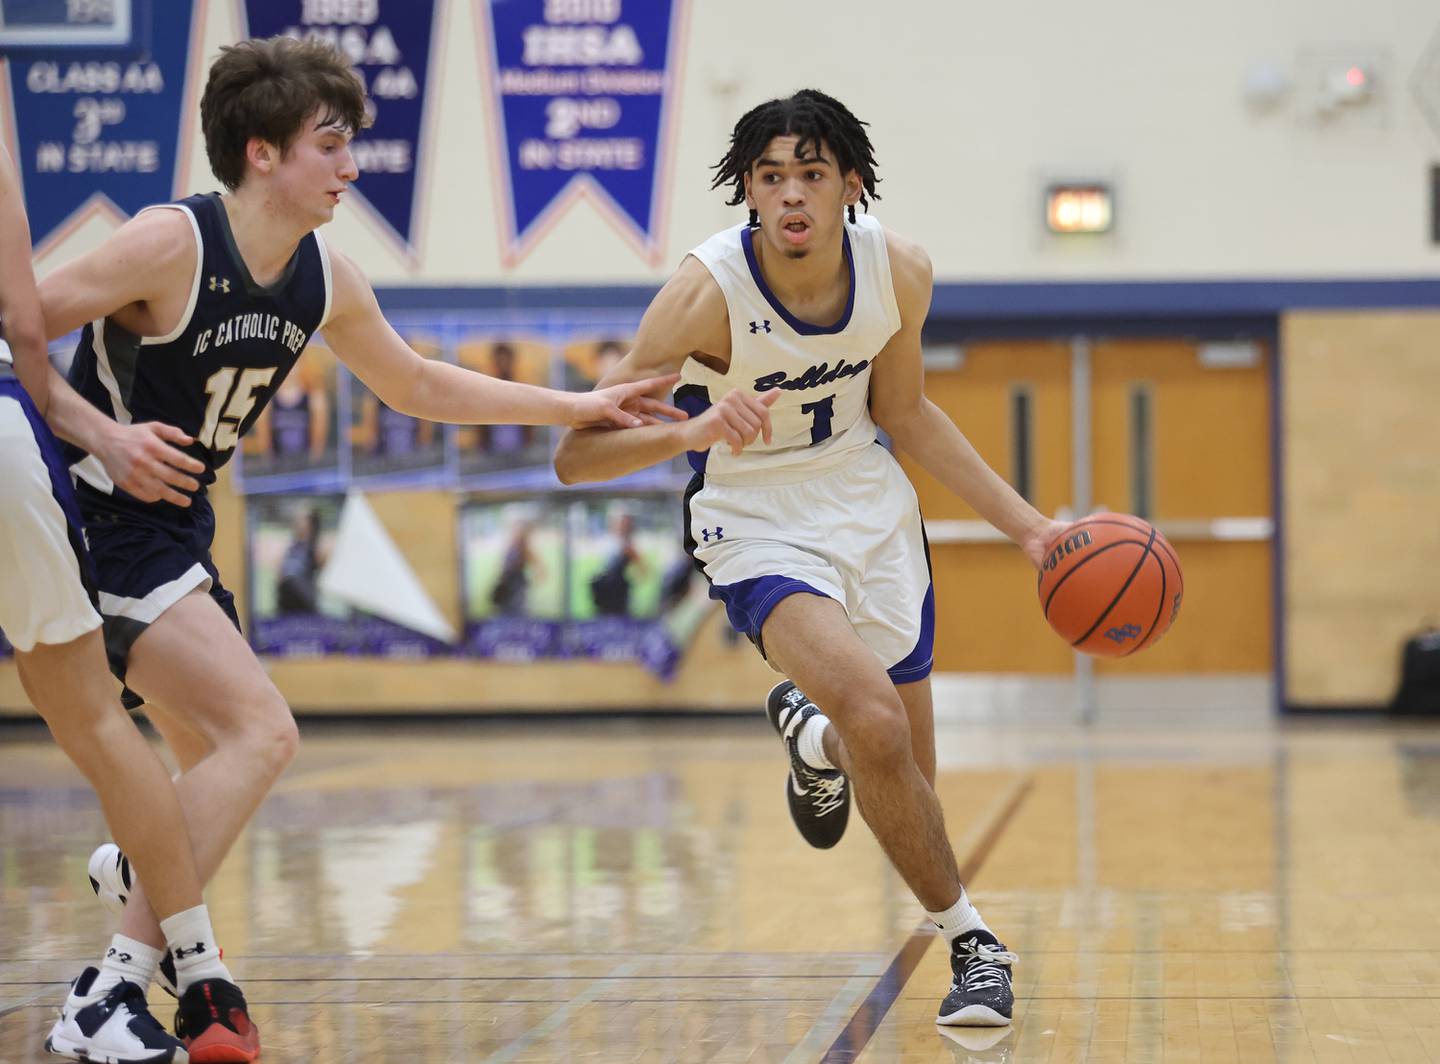 Riverside Brookfield's William Gonzalez (1) brings the ball up court during the boys varsity basketball game between IC Catholic Prep and Riverside Brookfield in Riverside on Tuesday, Jan. 24, 2023.